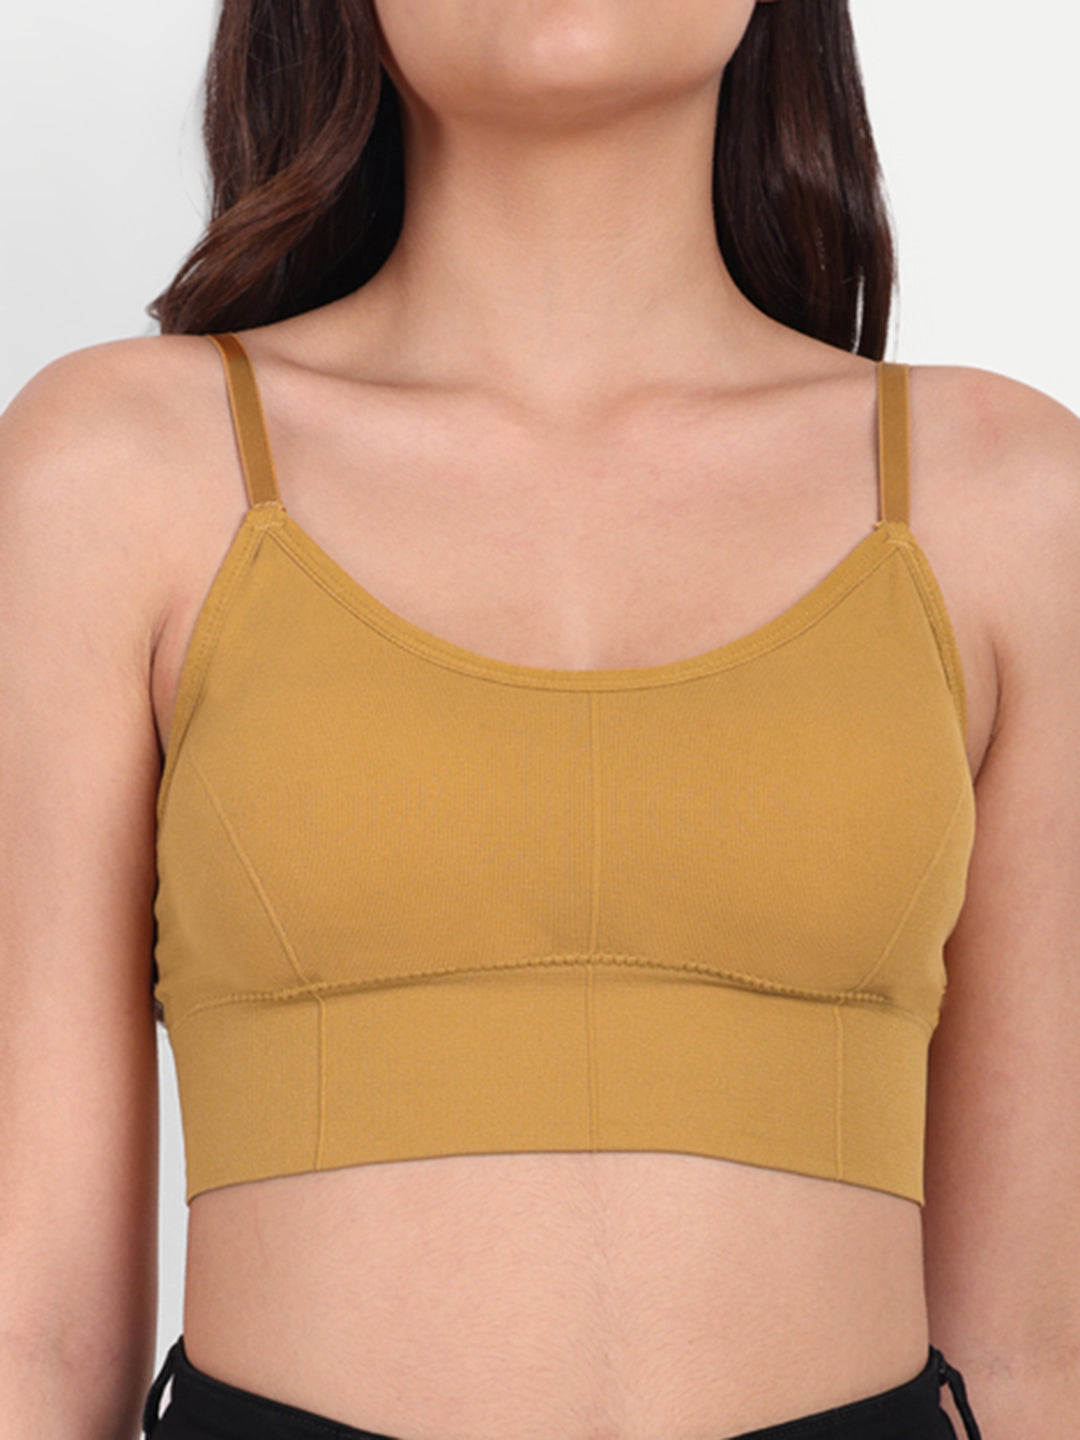 Pack Of 3 Women's Cami Crop Top Bralettes Sports Bra,Yellow, Gray, Gre –  Tom & Gee